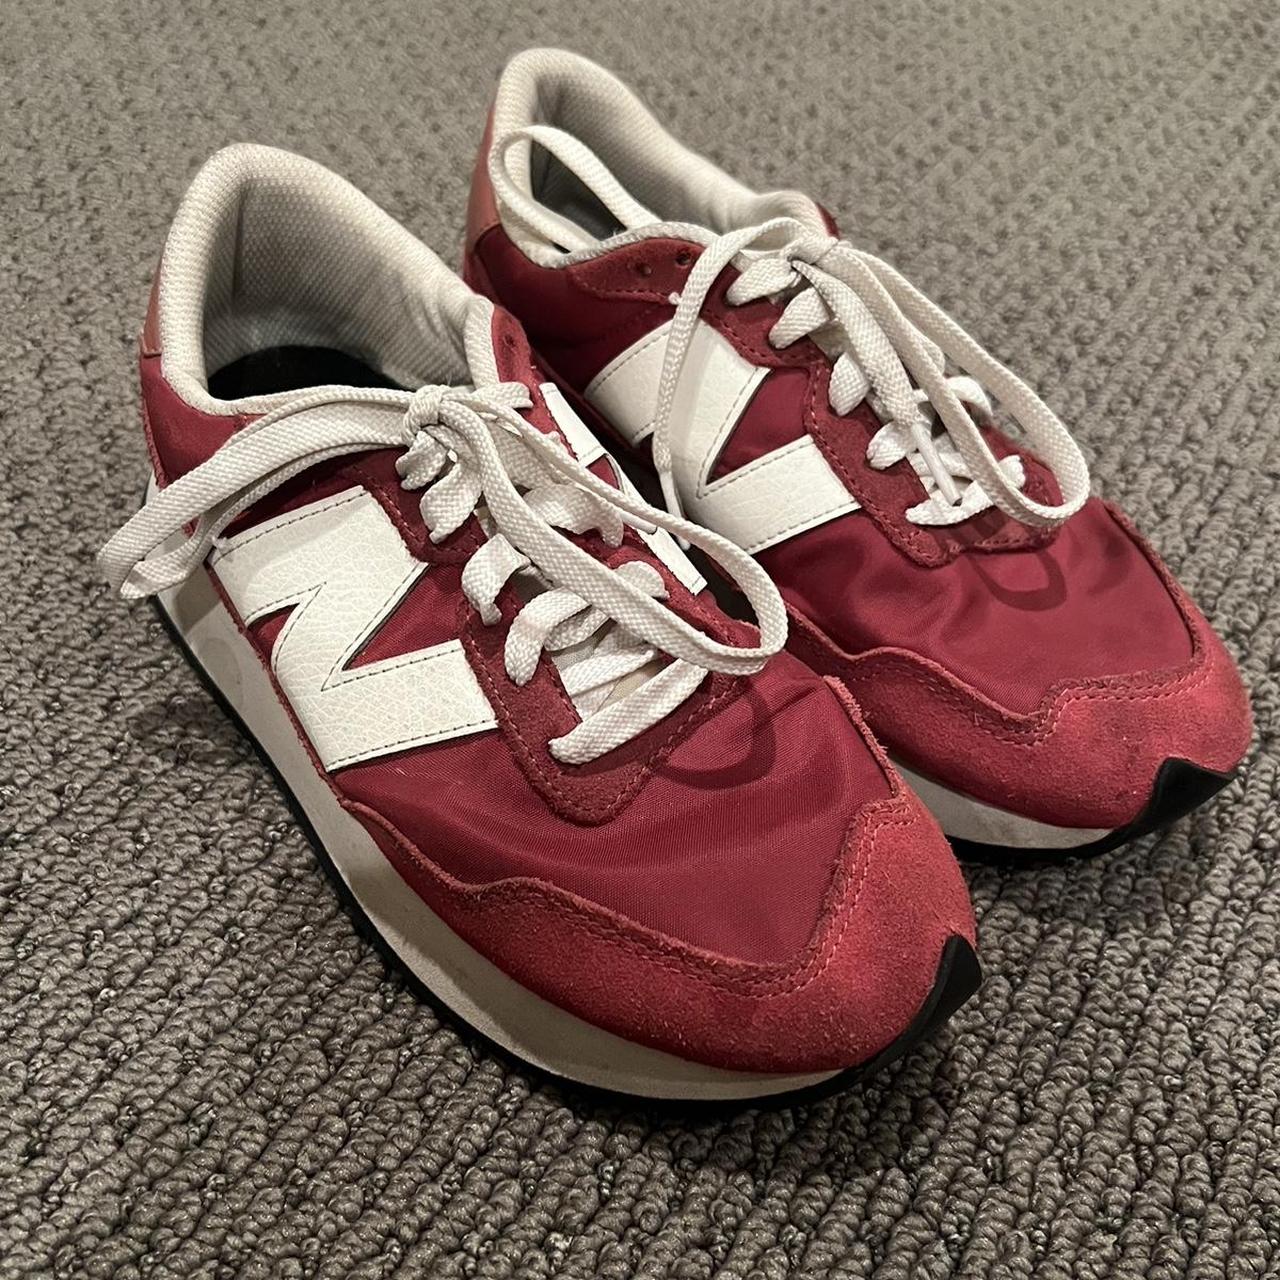 New Balance Women's Red and White Trainers